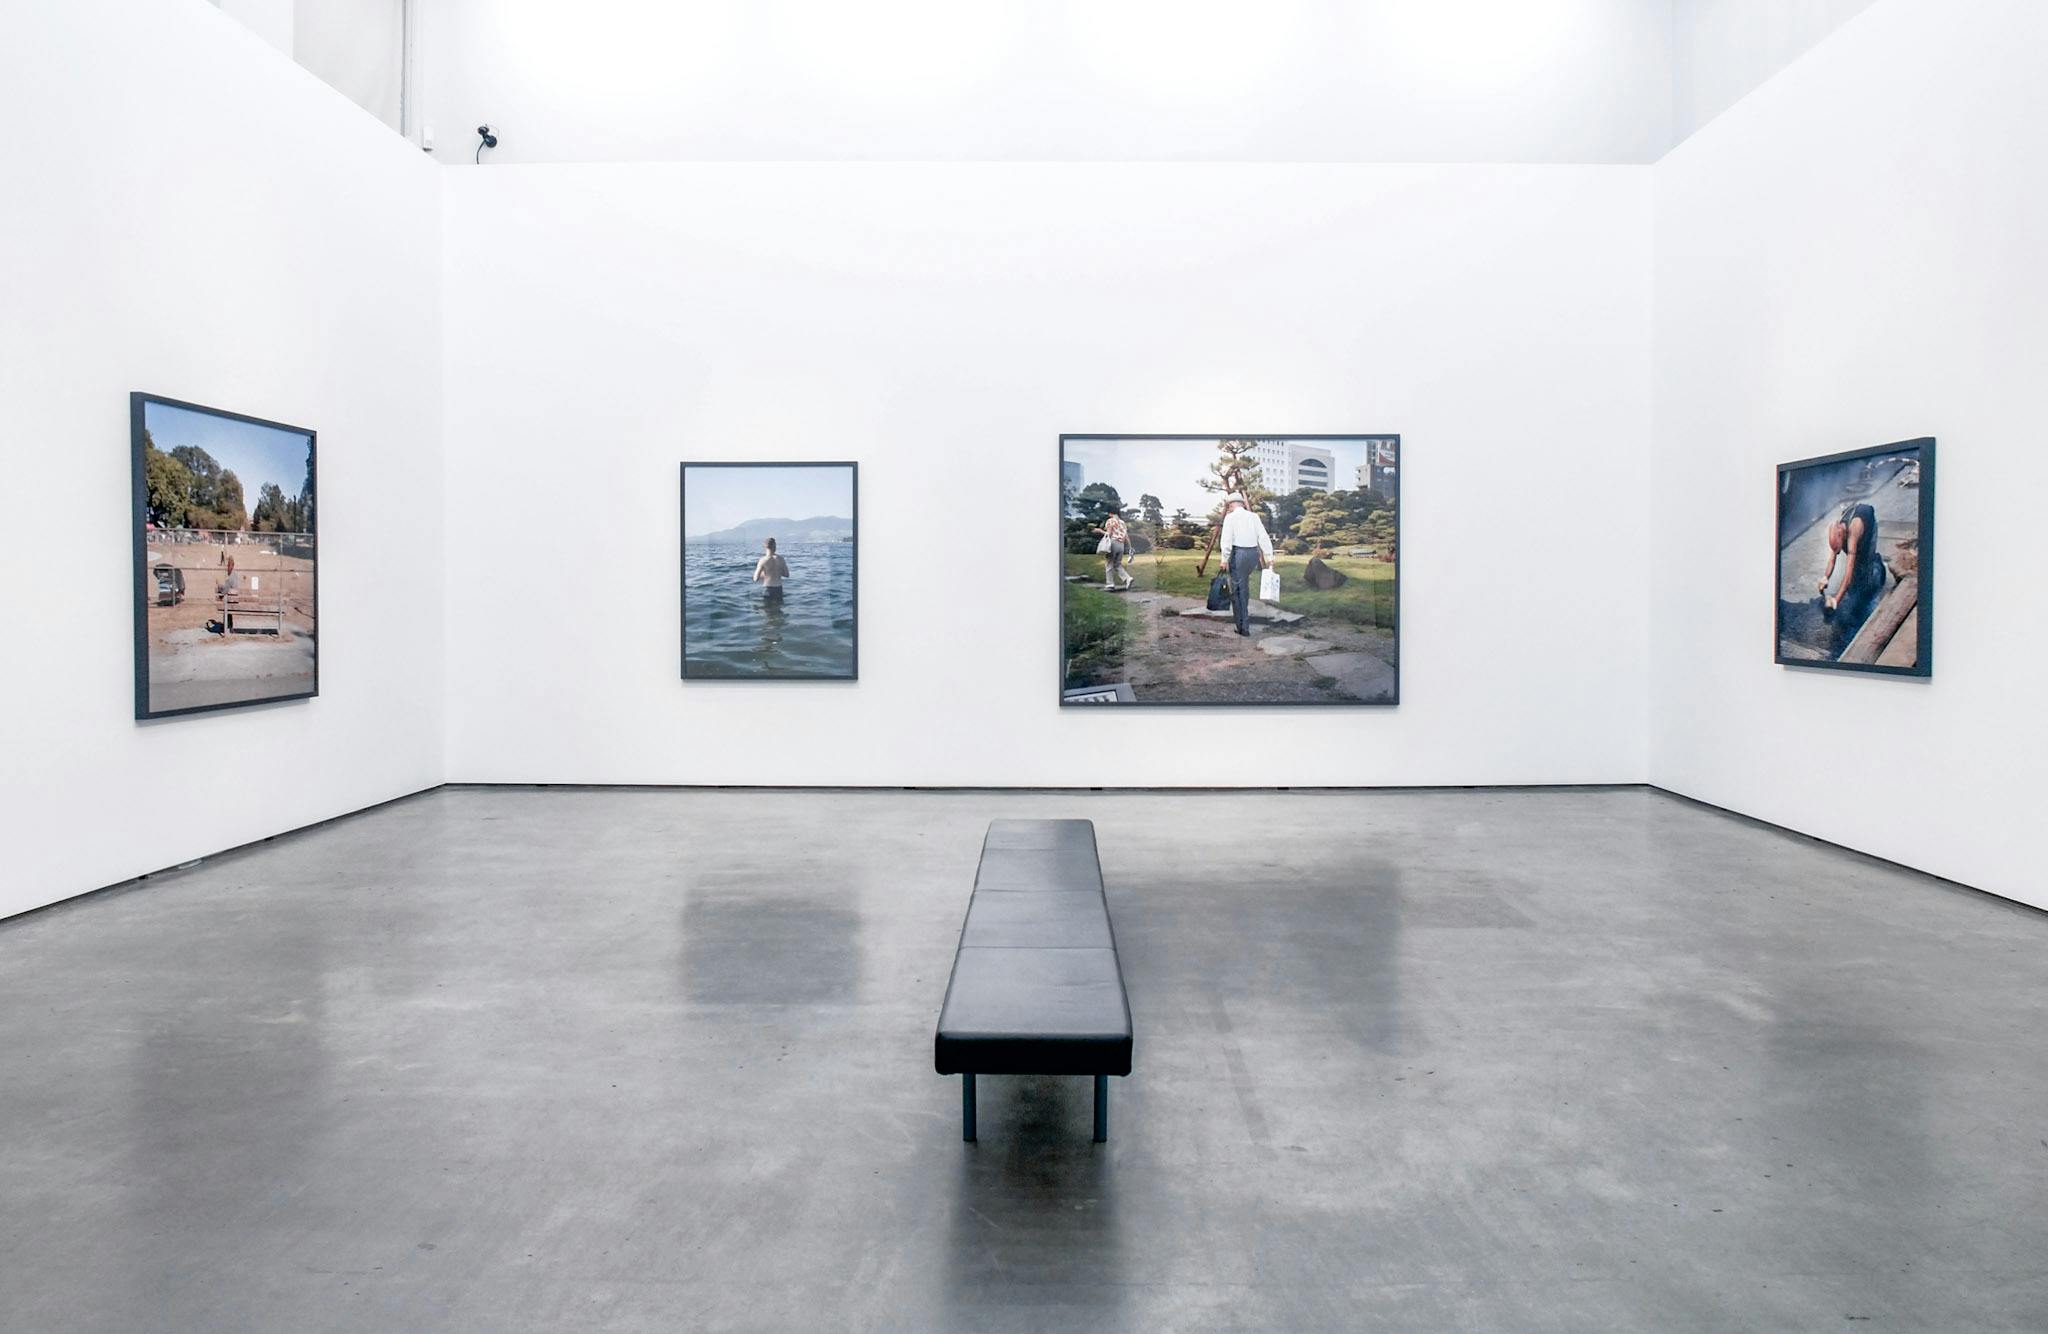 Four large-sized photographs are installed on the gallery walls. One photograph depicts a person standing in a body of water. The other photograph captures two people walking in a park. 